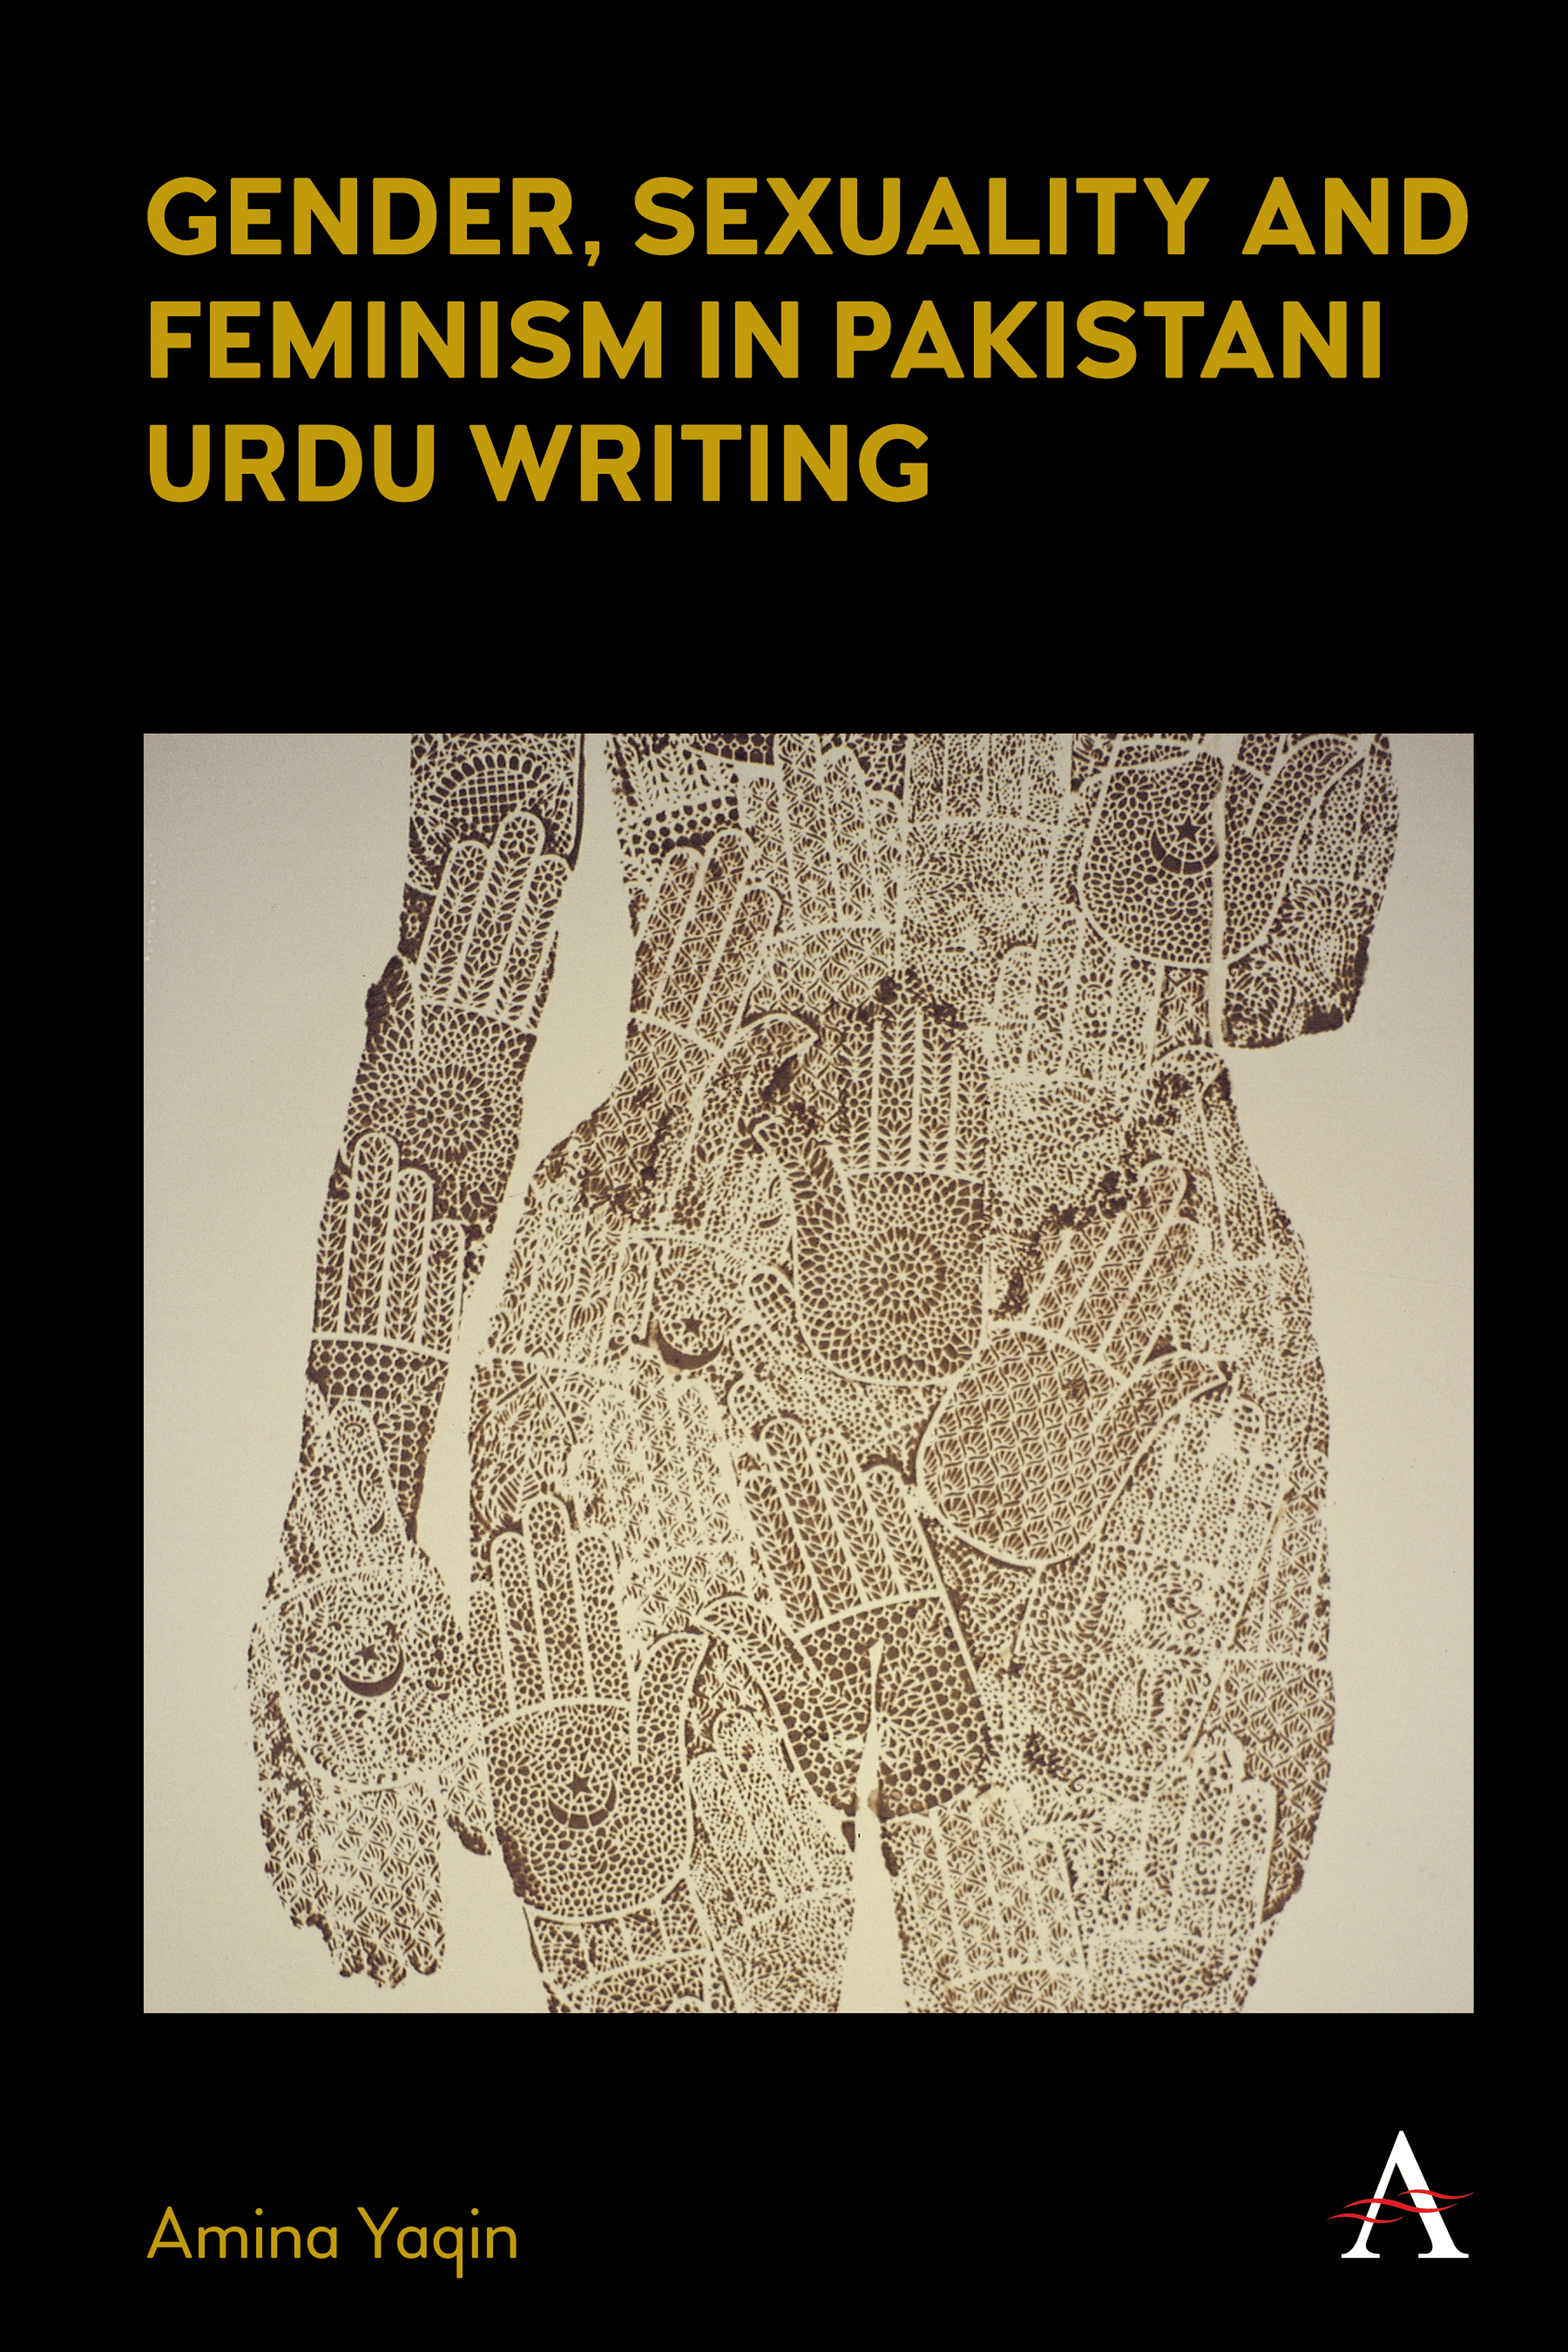 Gender, Sexuality, and Feminism in Pakistani Urdu Writing